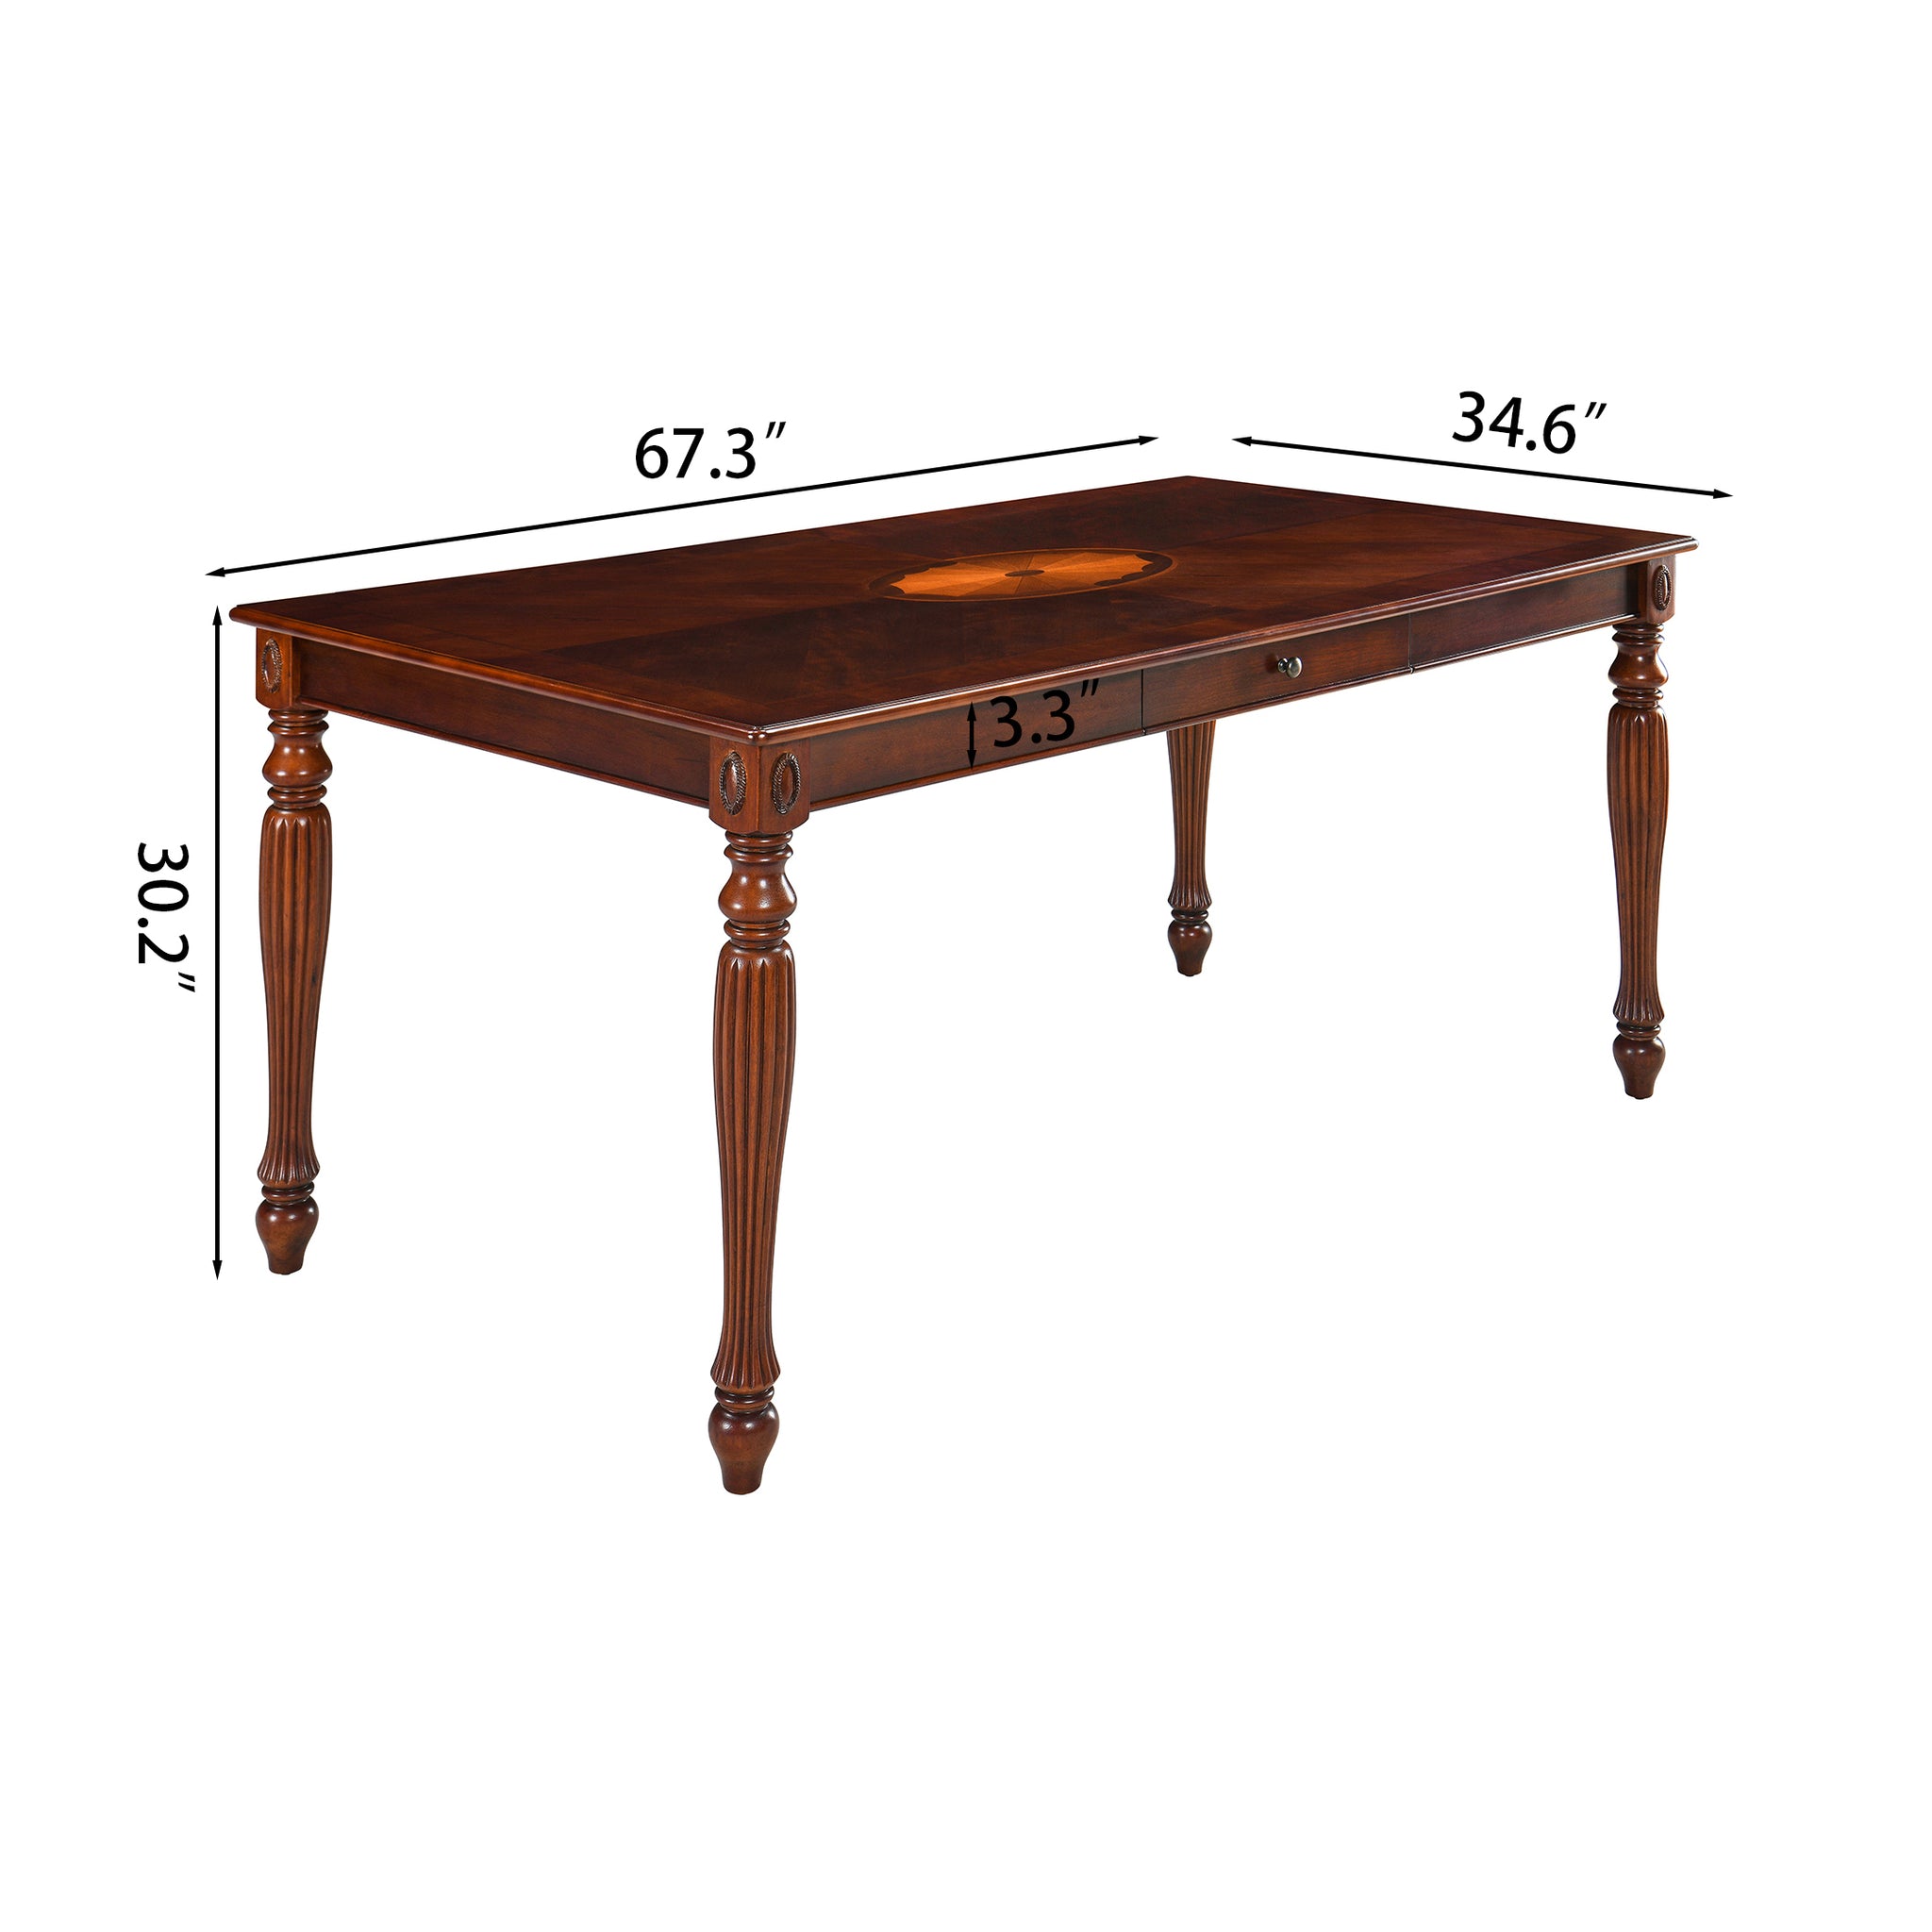 67.3" Dining Room Kitchen Table for 6 People